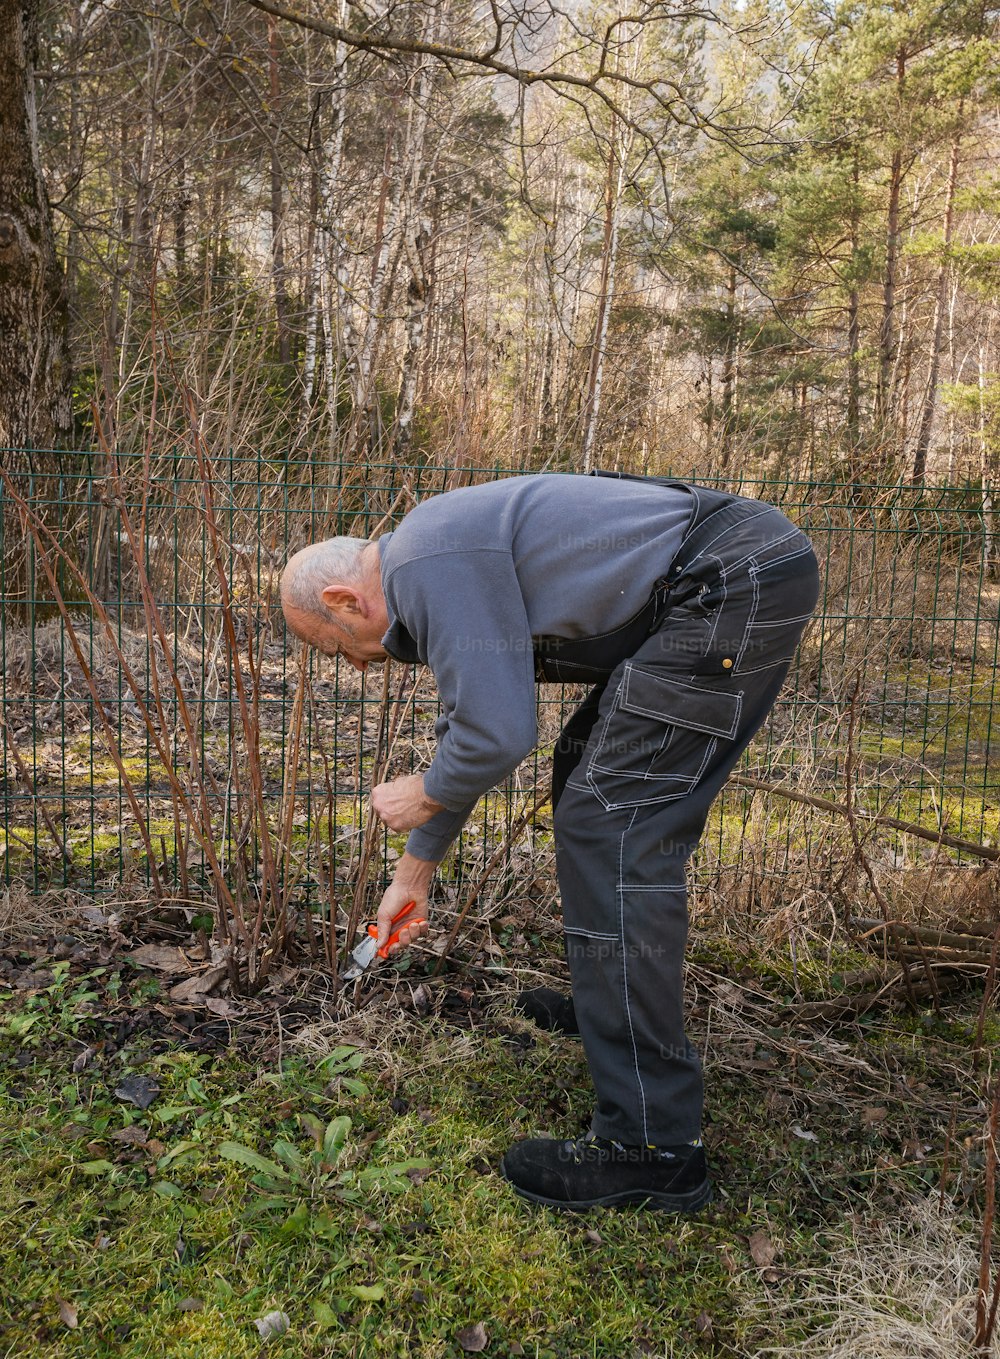 a man in a gray shirt and black pants is trimming a tree